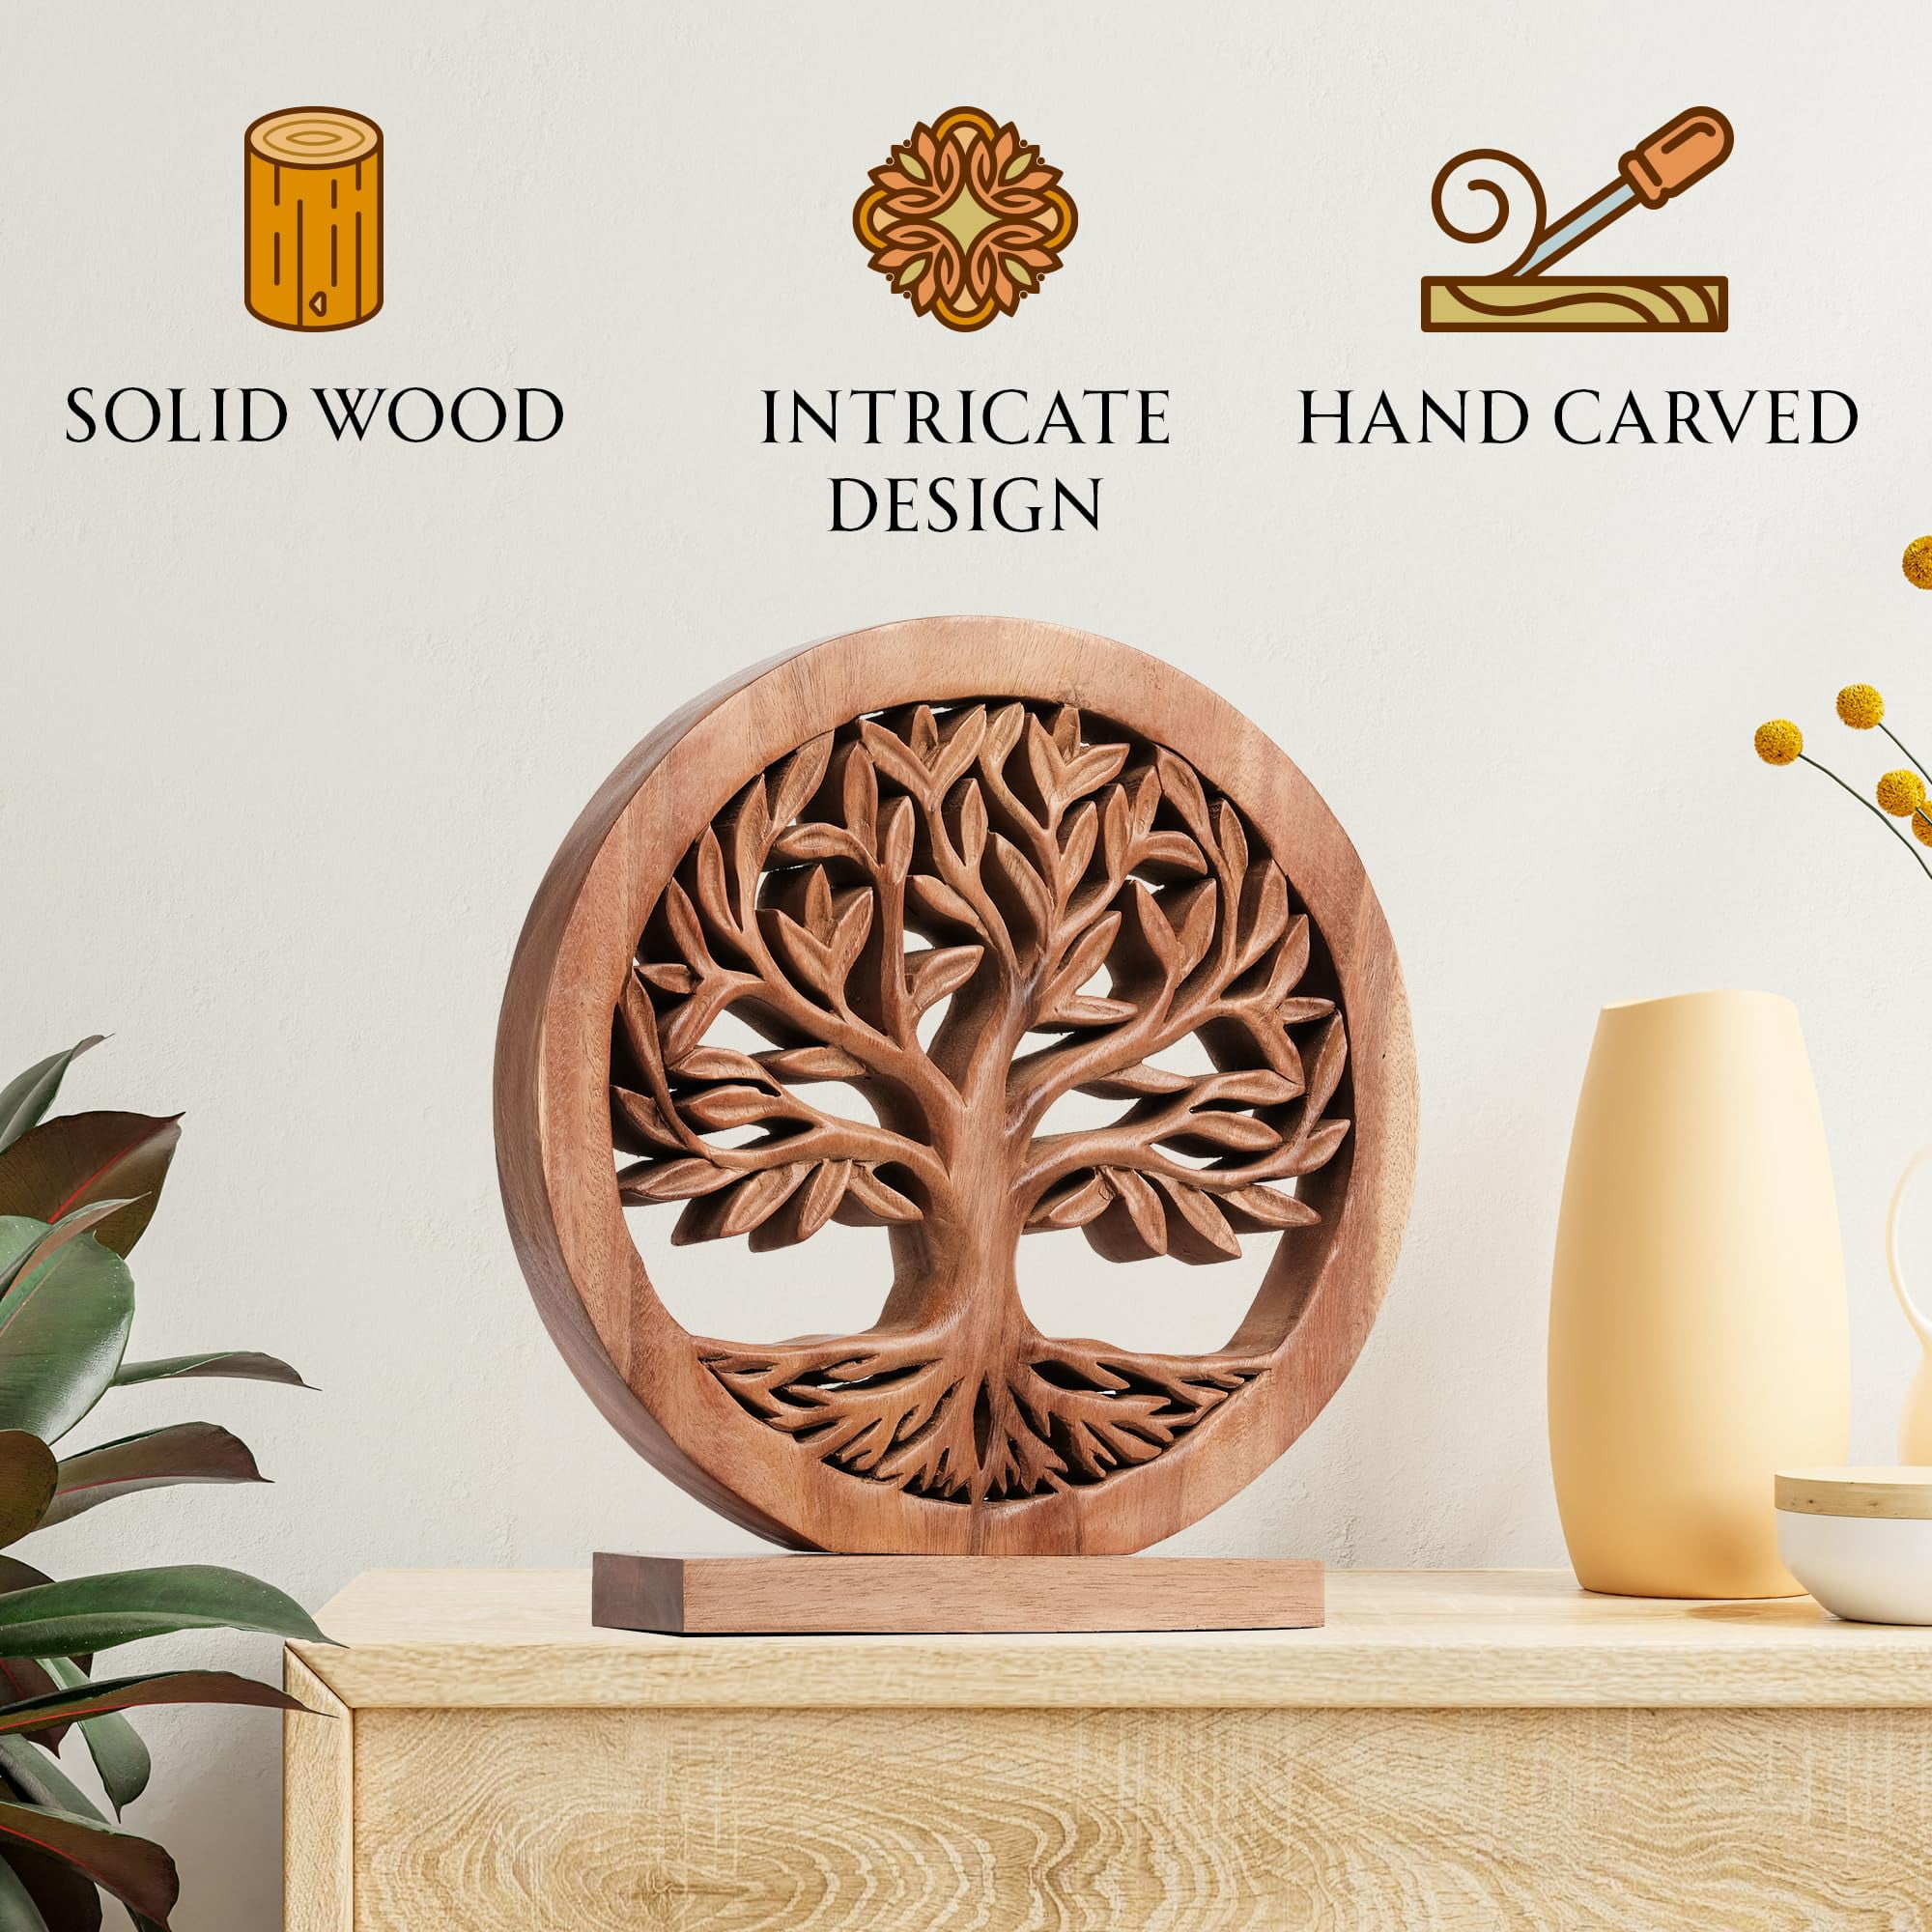 Handmade Wood Home Decor & Accessories made in USA by Kahl Wood Decor